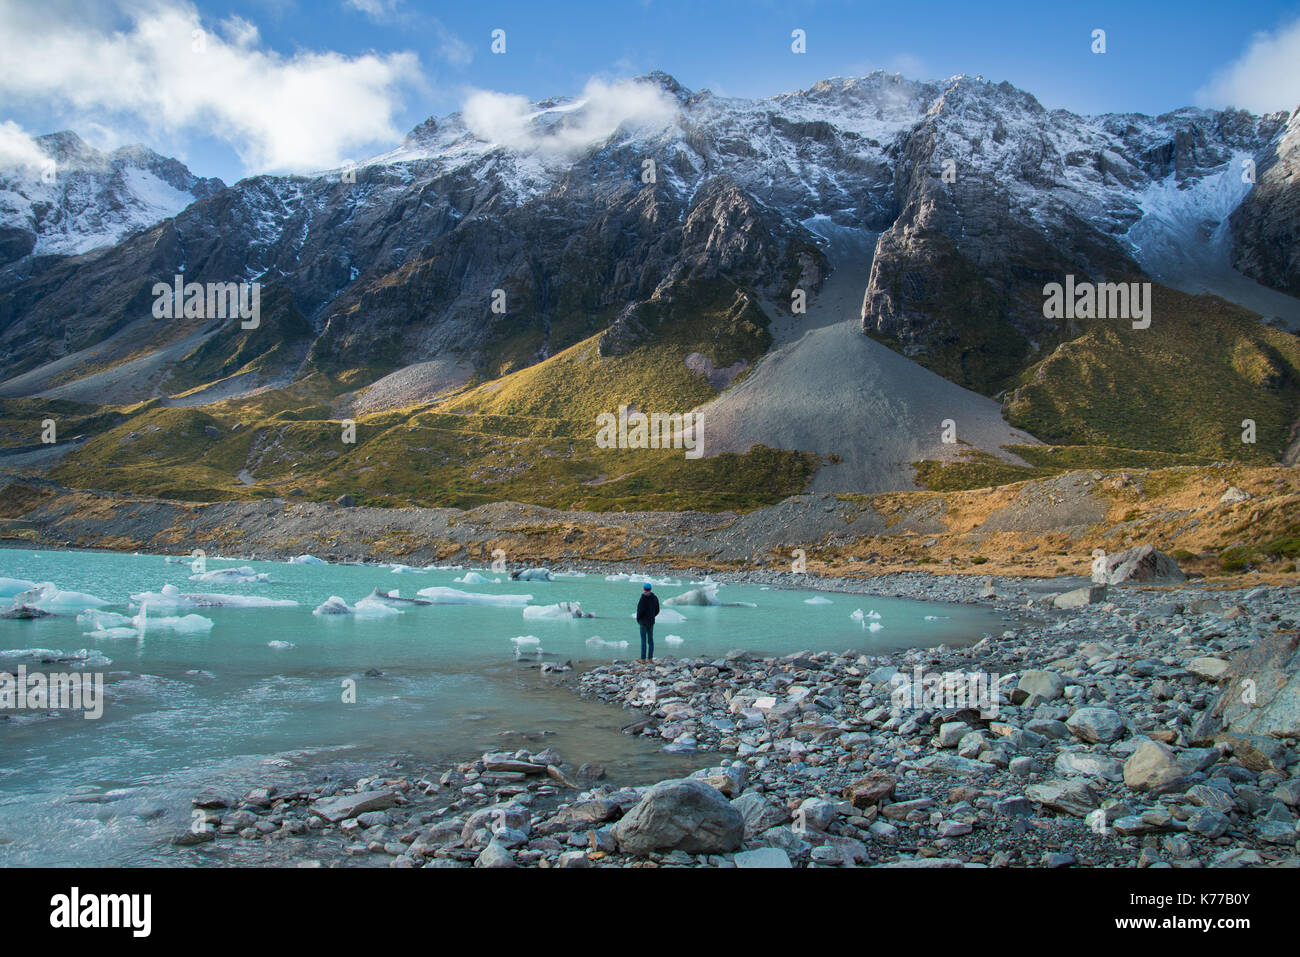 person at alpine lake surrounded by mountains and icebergs Stock Photo